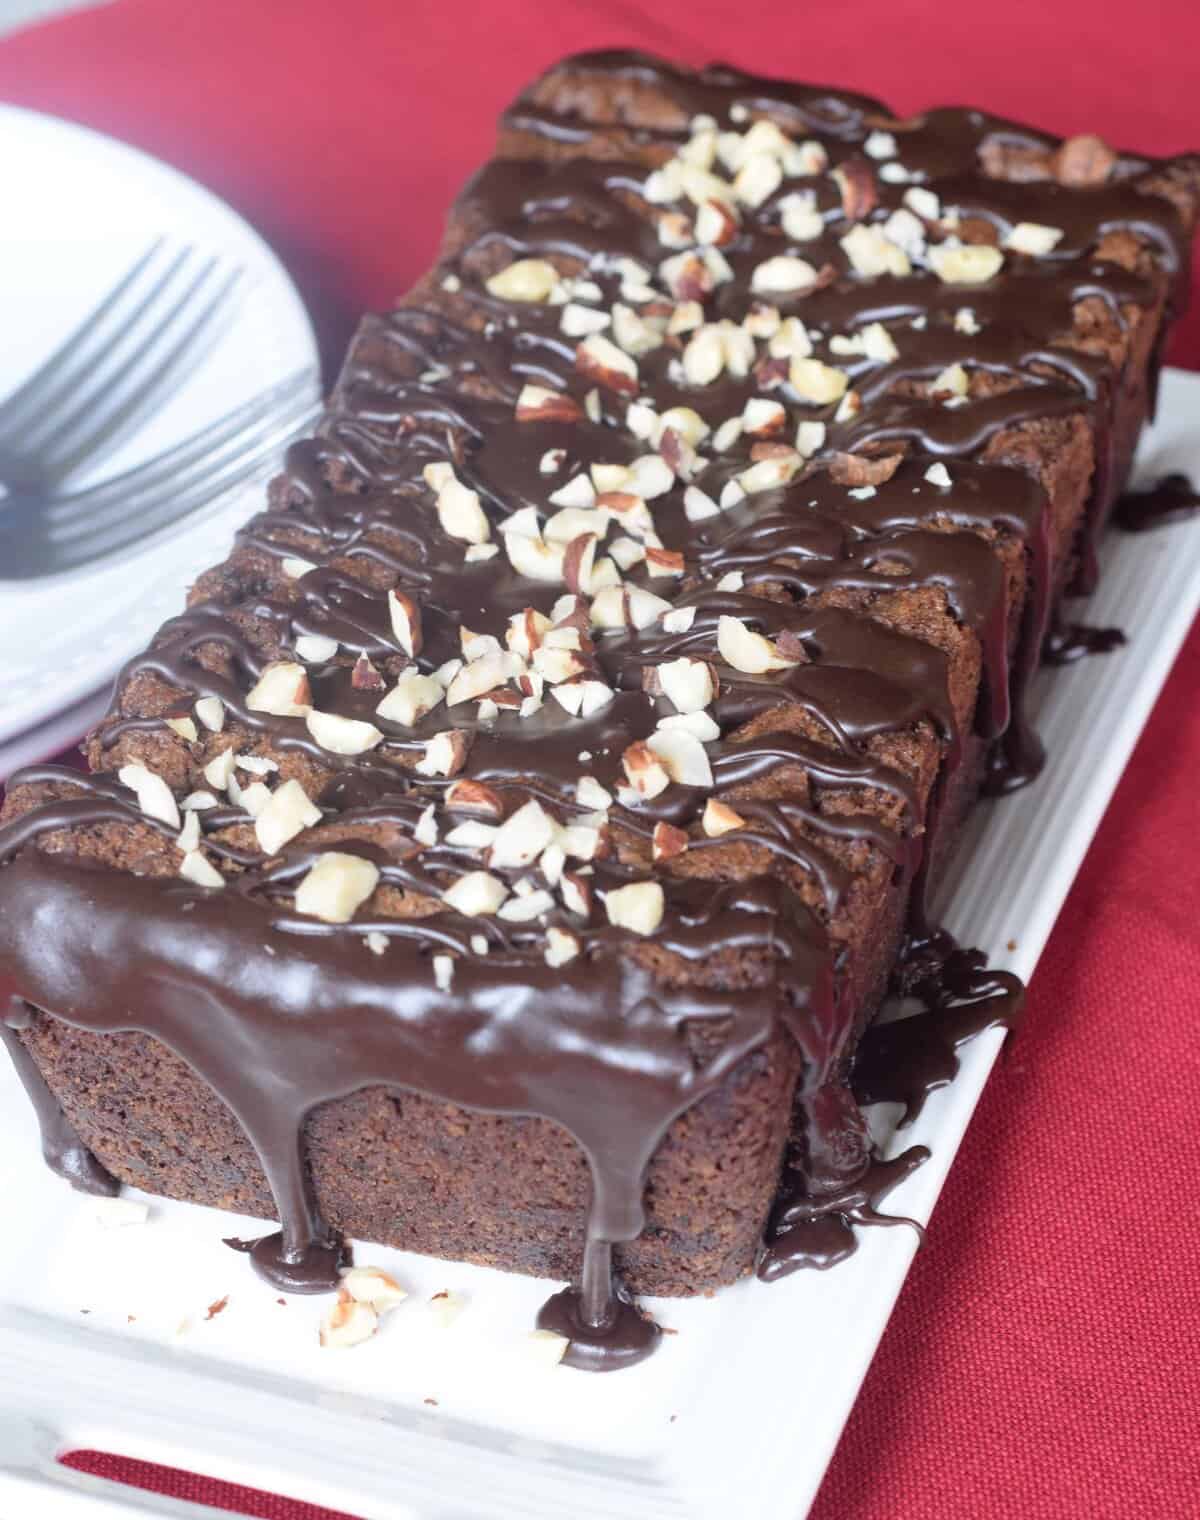 Chocolate loaf of bread with ganache drizzled over with chopped hazelnuts sprinkled